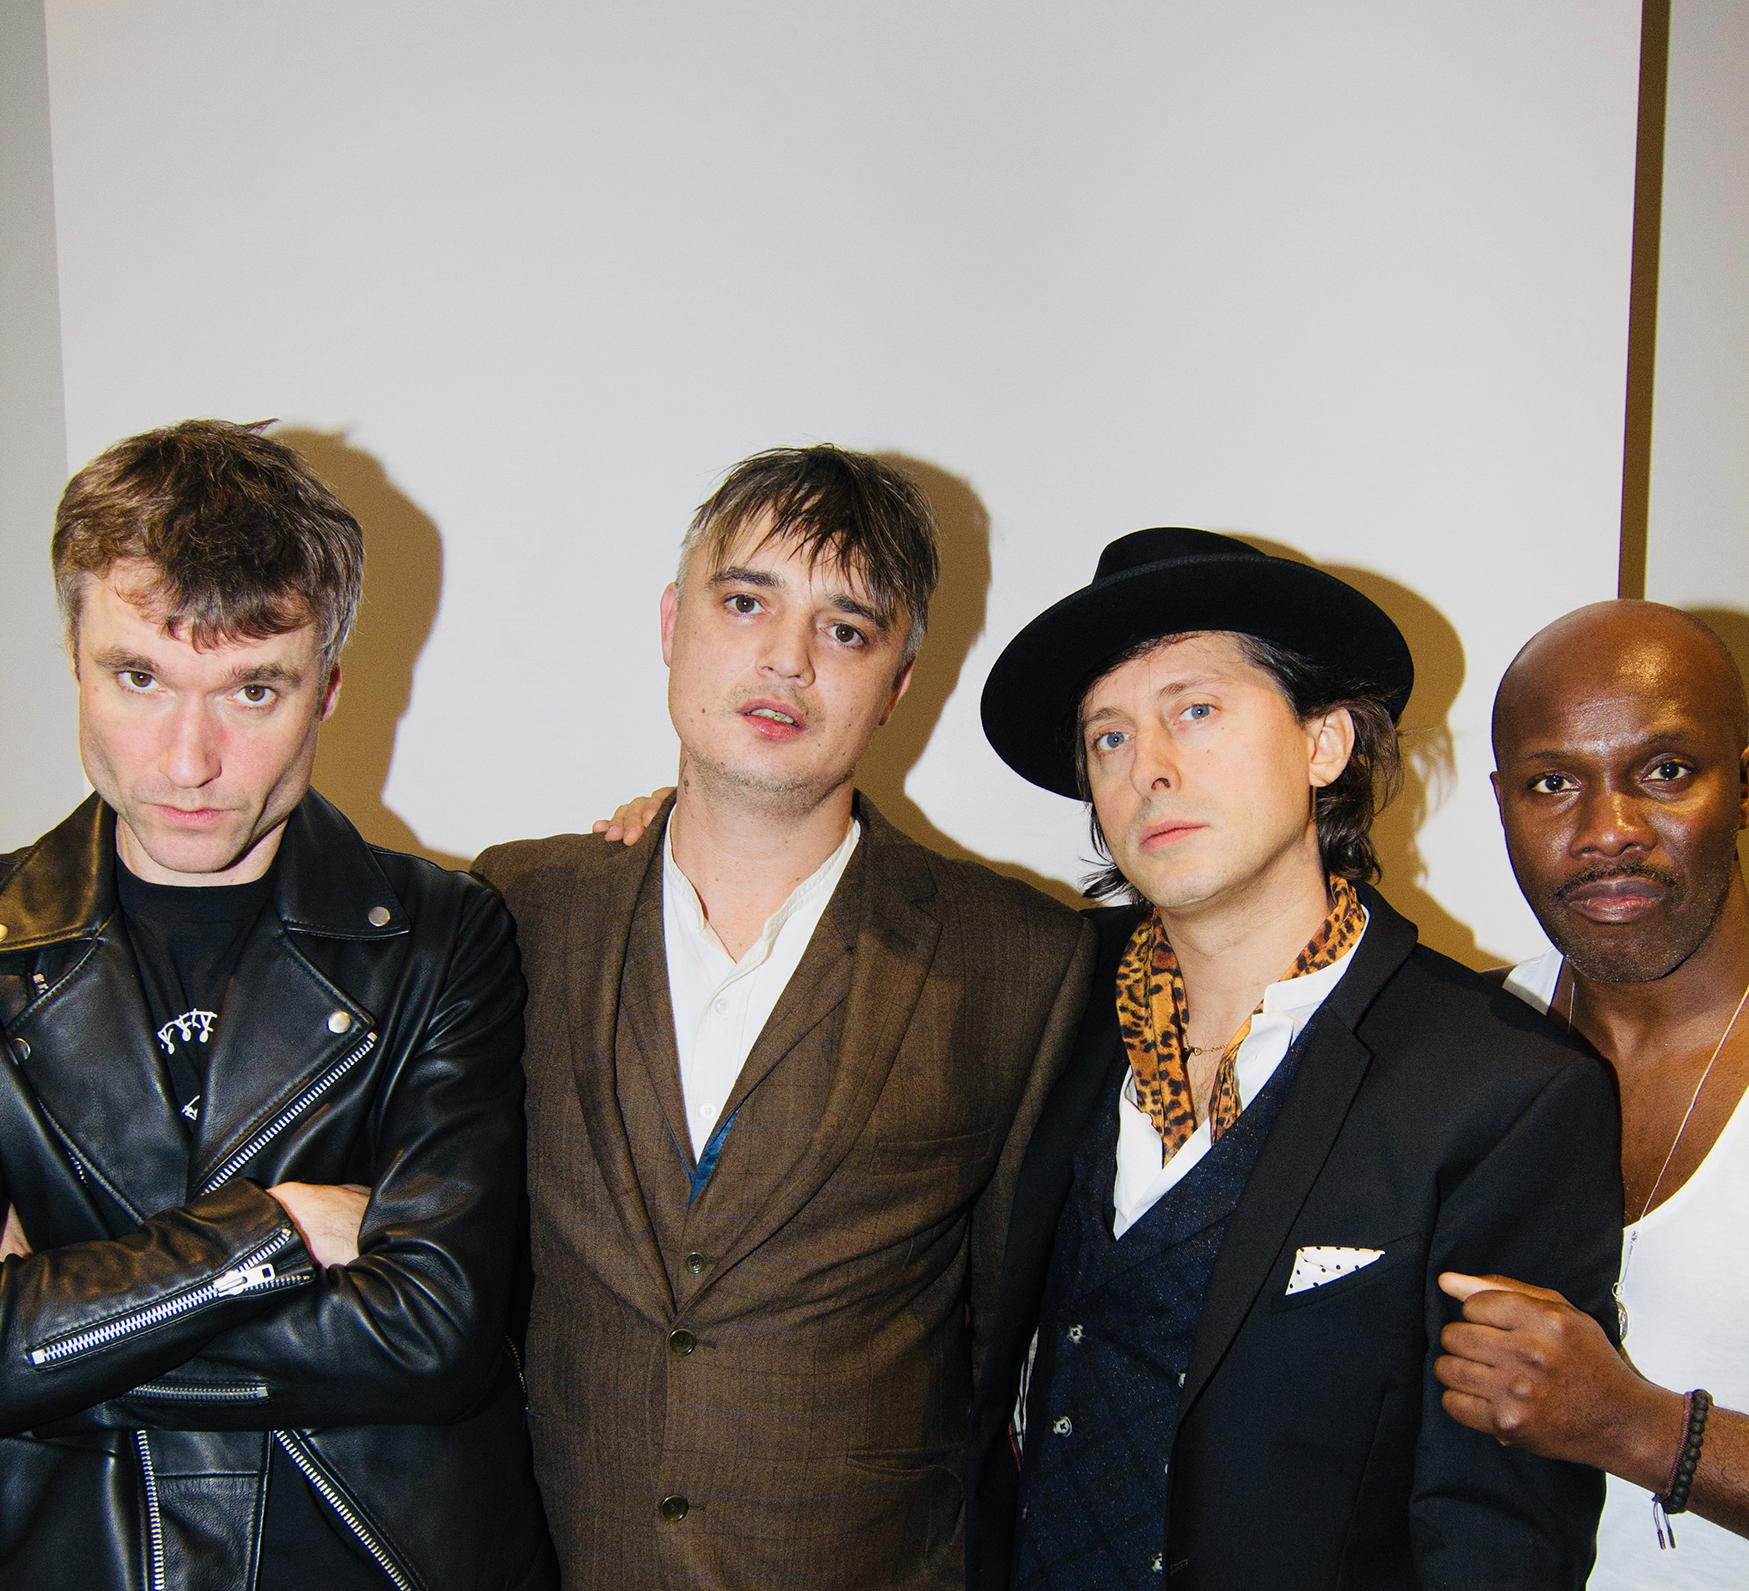 THE LIBERTINES announce a fifteen-date Christmas jaunt across the UK in November and December 1